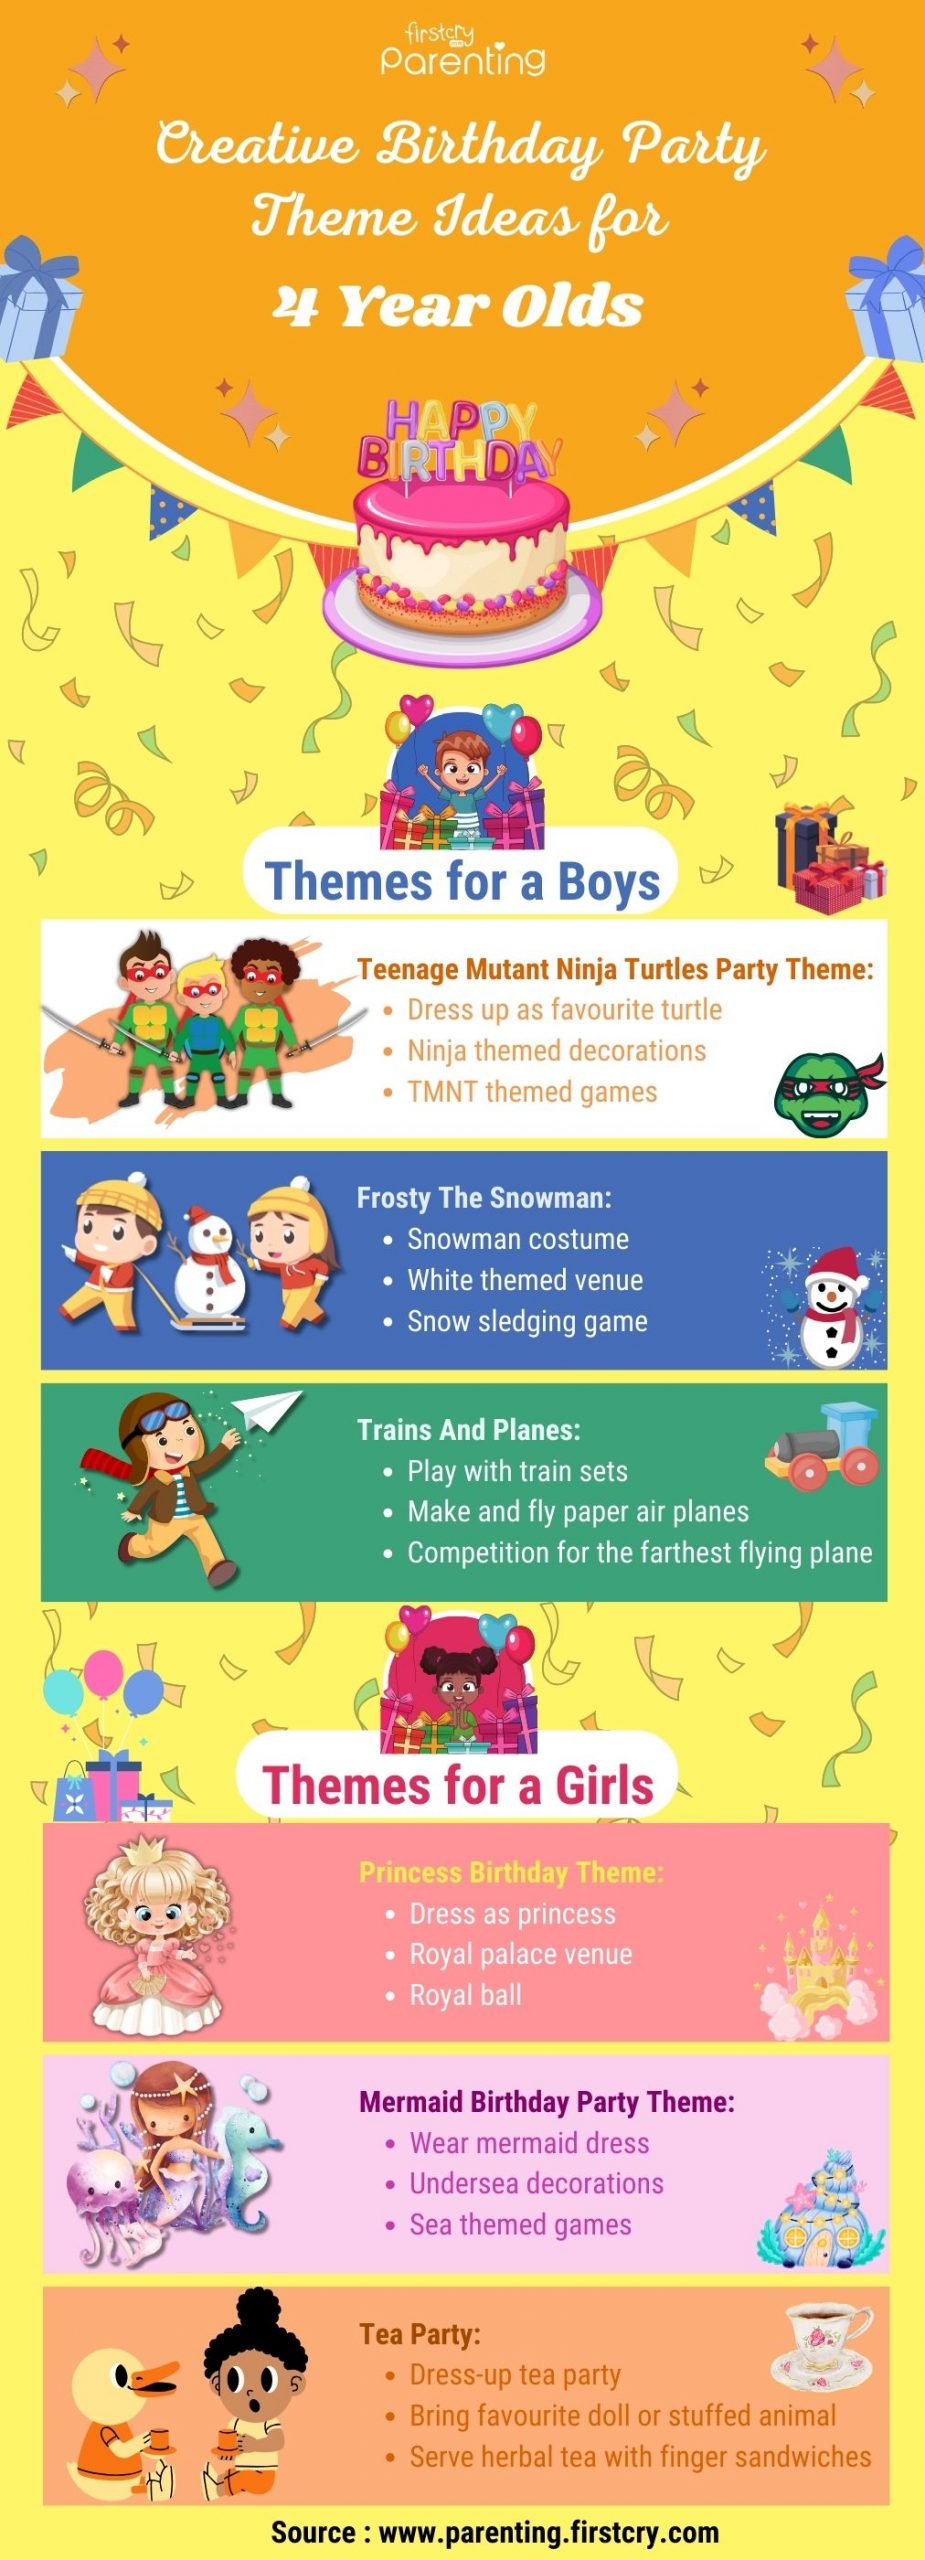 Creative Birthday Party Theme Ideas for 4 Year Olds - Infographic